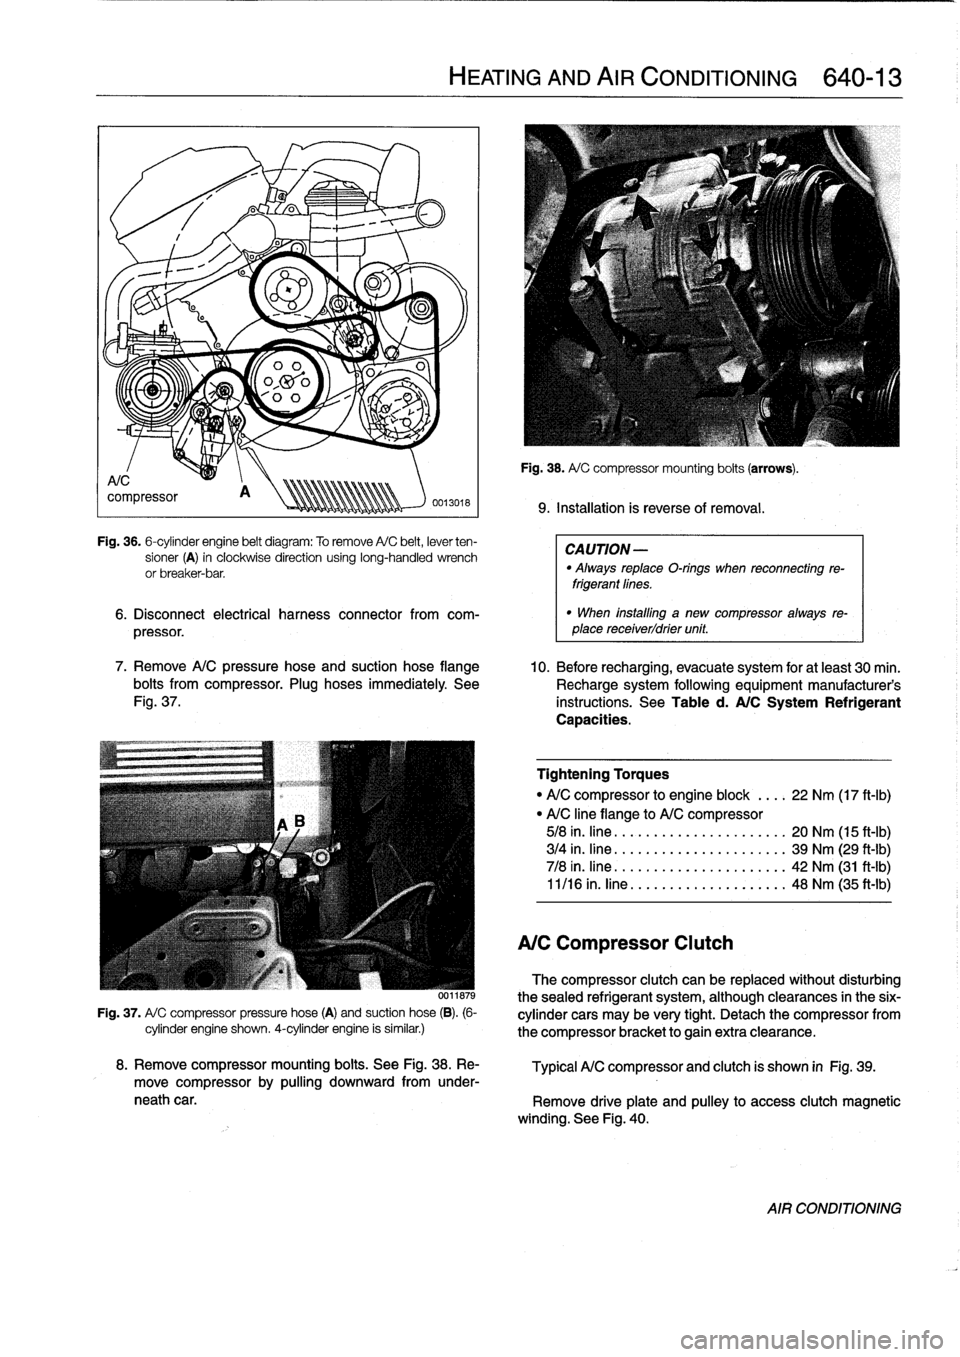 BMW 318i 1997 E36 Owners Manual 
Fig
.
36
.
6-cylinder
engine
belt
diagram
:
To
remove
A/C
belt,
lever
ten-
sioner
(A)
in
clockwise
direction
using
long-handled
wrench
or
breaker-bar
.

6
.
Disconnect
electrical
harness
connector
fr